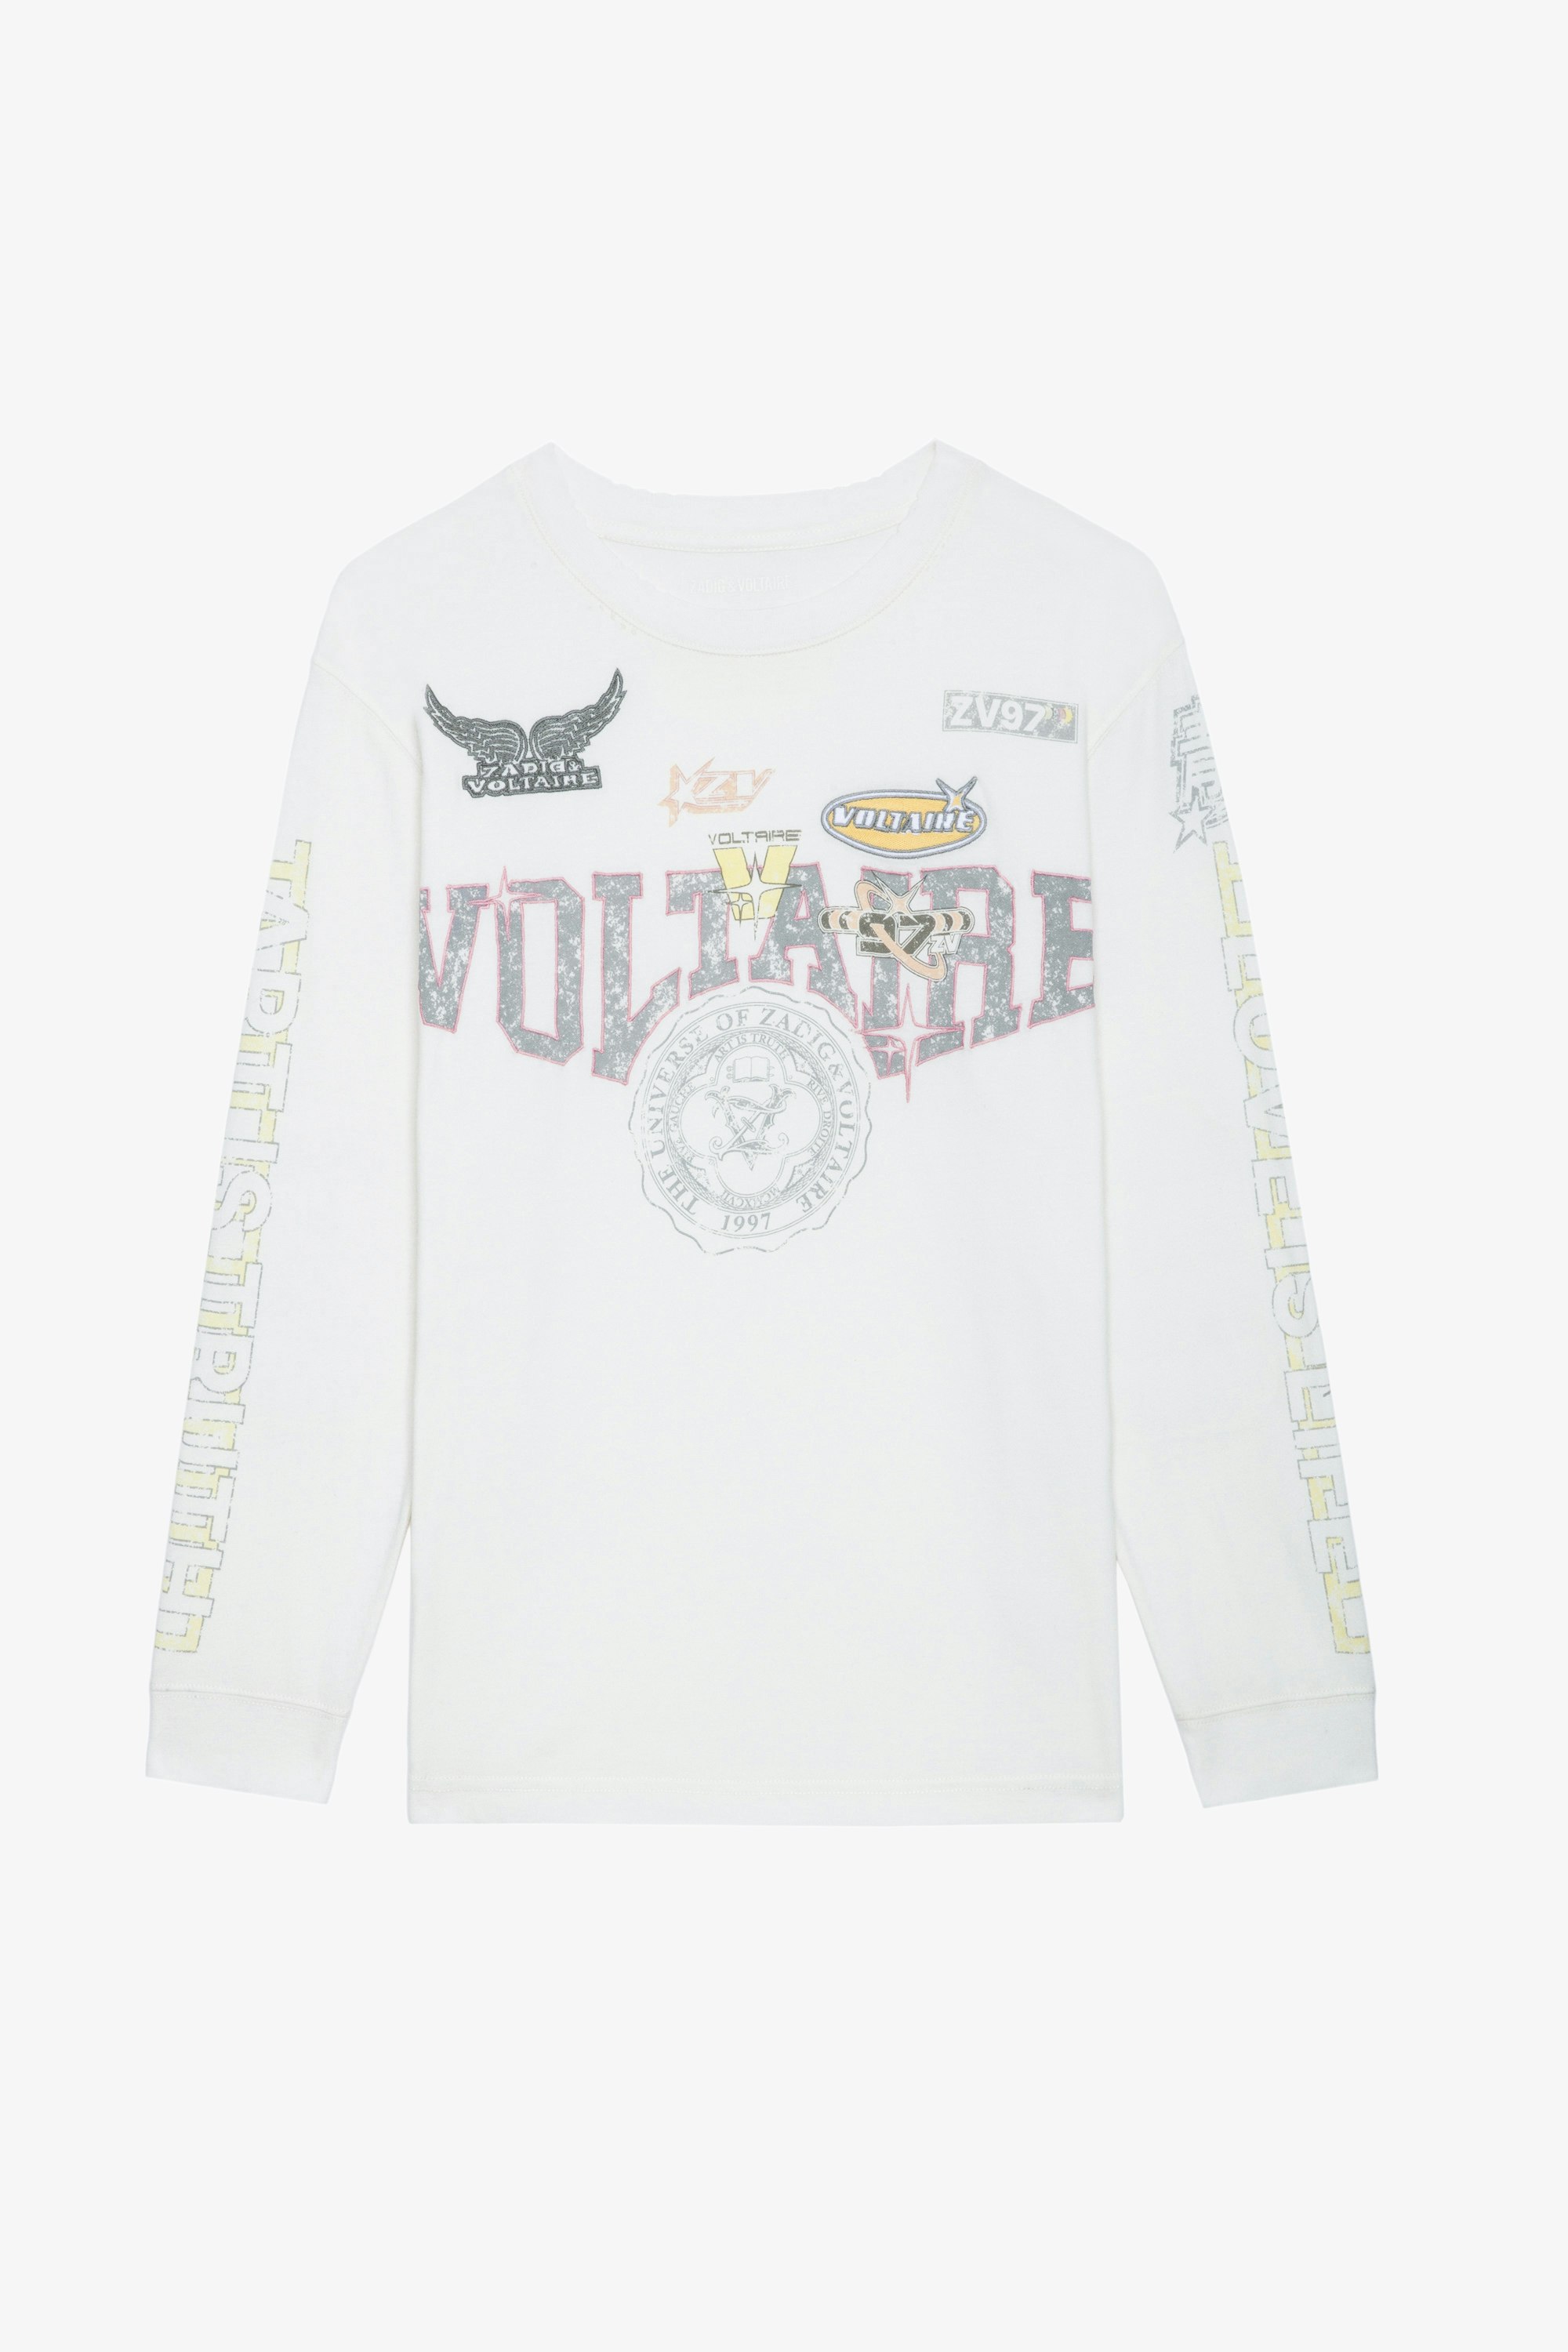 Noane Voltaire T-shirt - Ecru cotton biker-style long-sleeved T-shirt with Voltaire badge motifs and elbow pads.